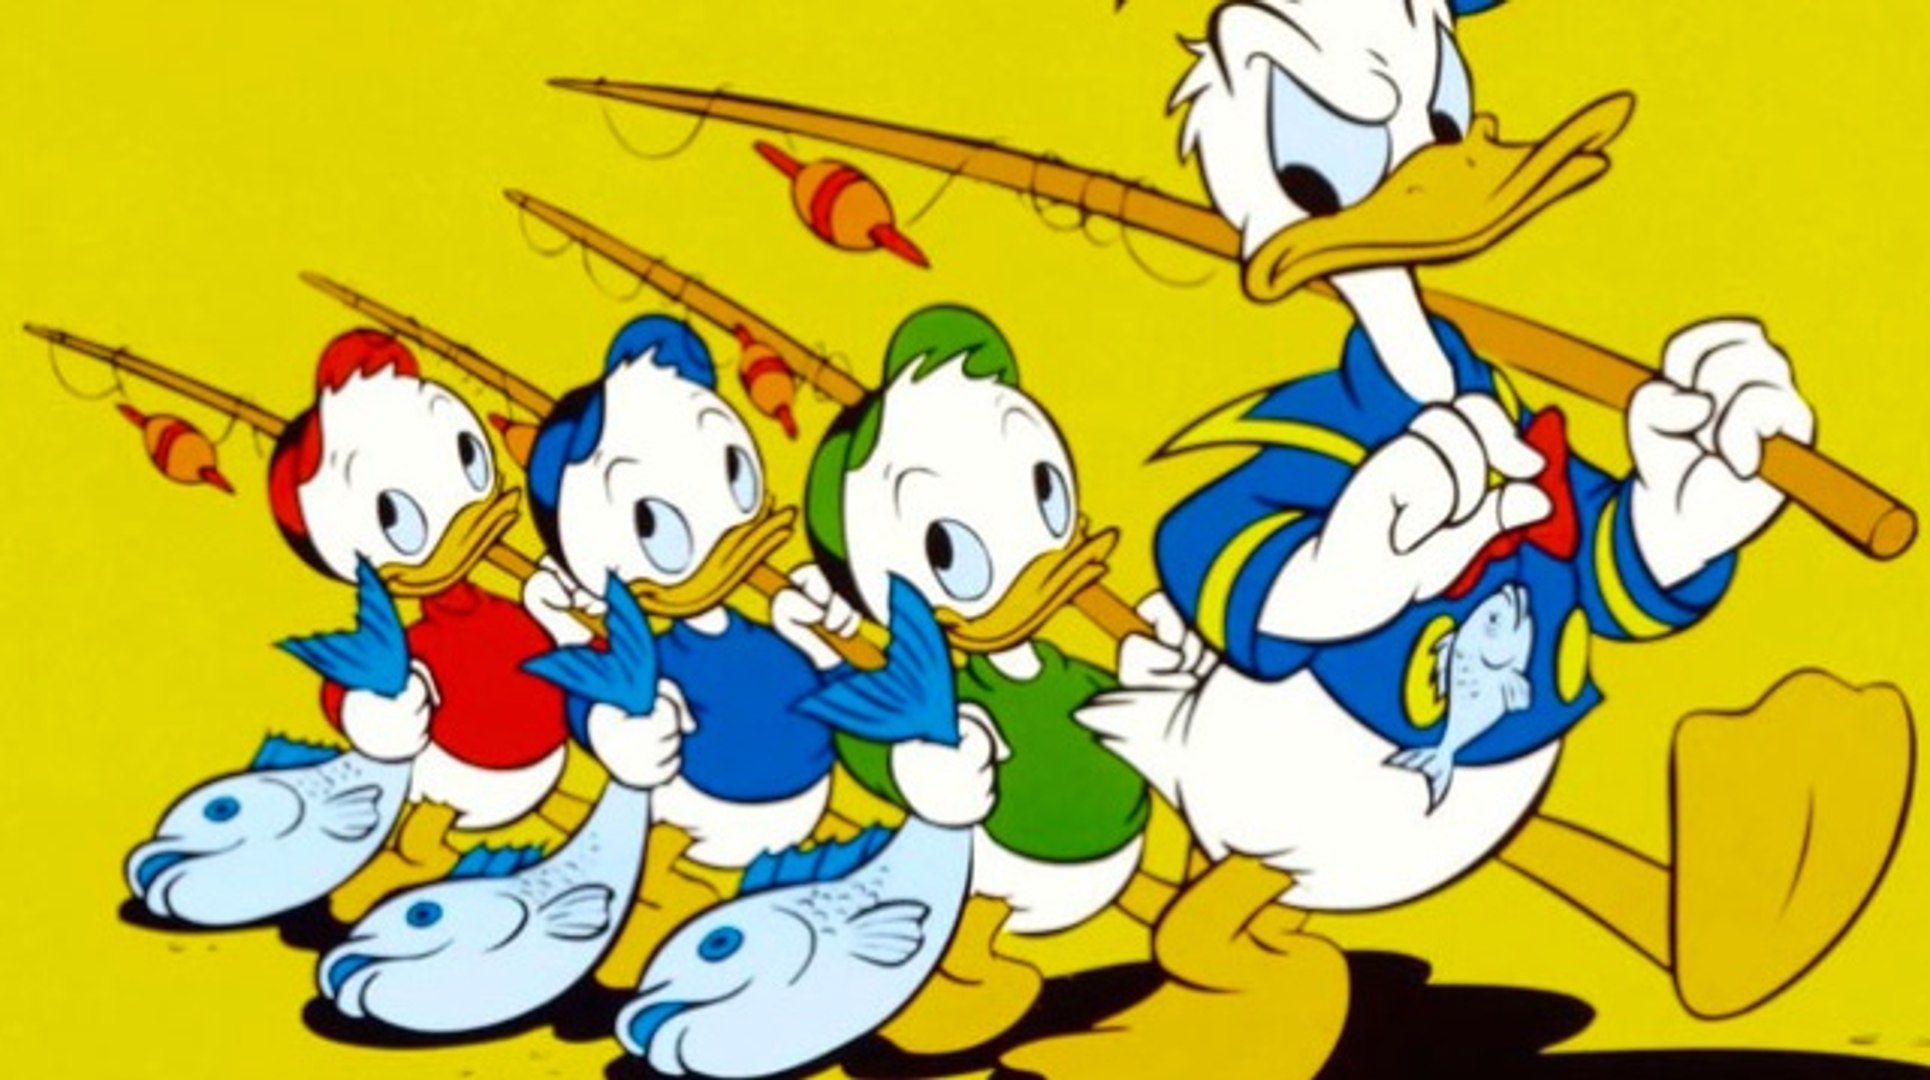 14 DISNEY CARTOONS - DONALD DUCK AND HIS NEPHEWS -VERY FUNNY ! 2:00 HOURS  NON STOP - video Dailymotion